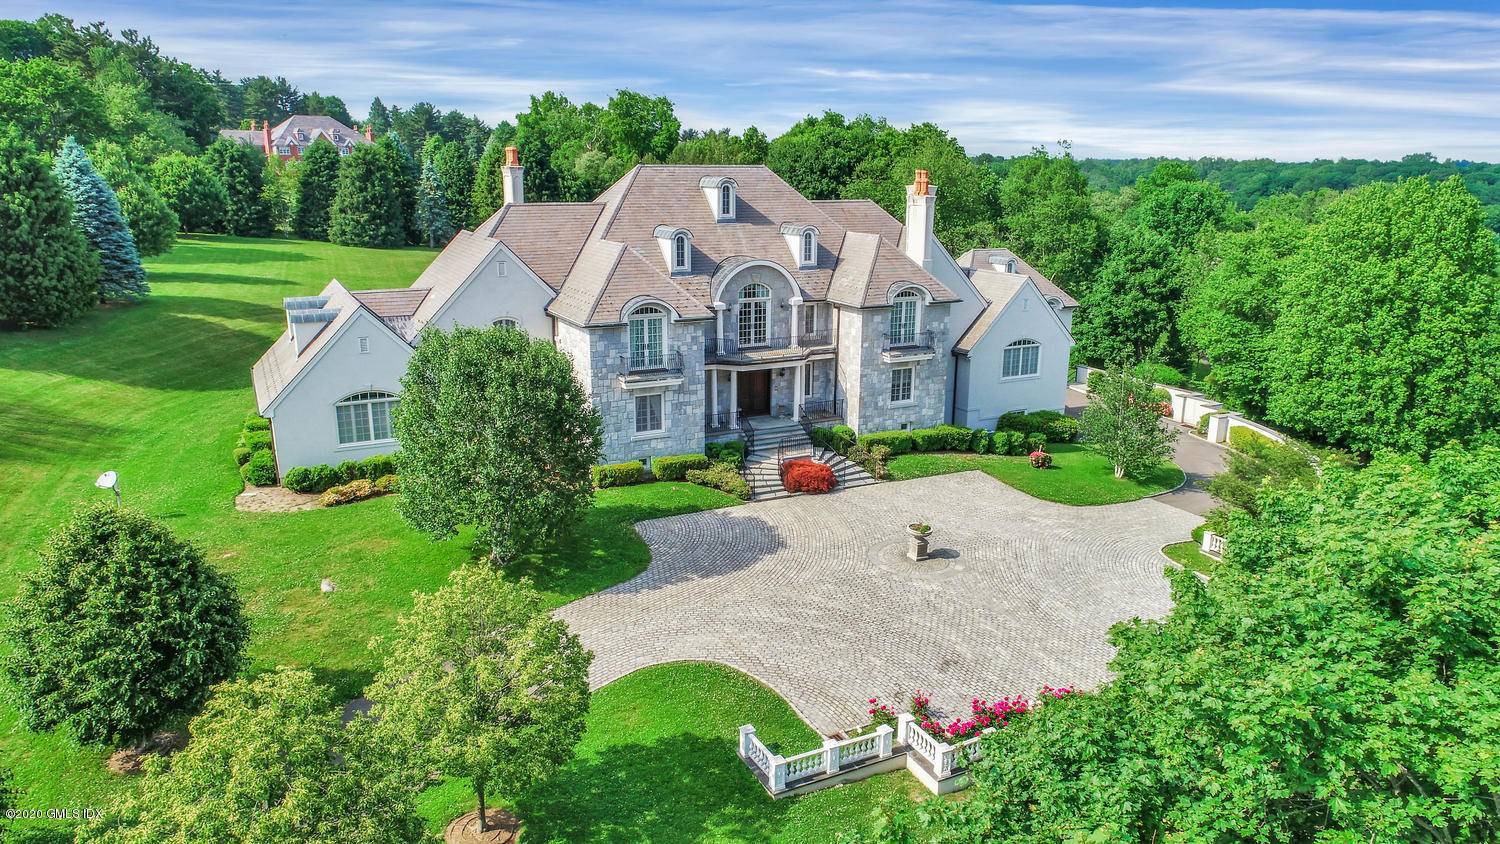 Scenic Round Hill Road leads to this exceptional estate on 4 acres with an additional 7.